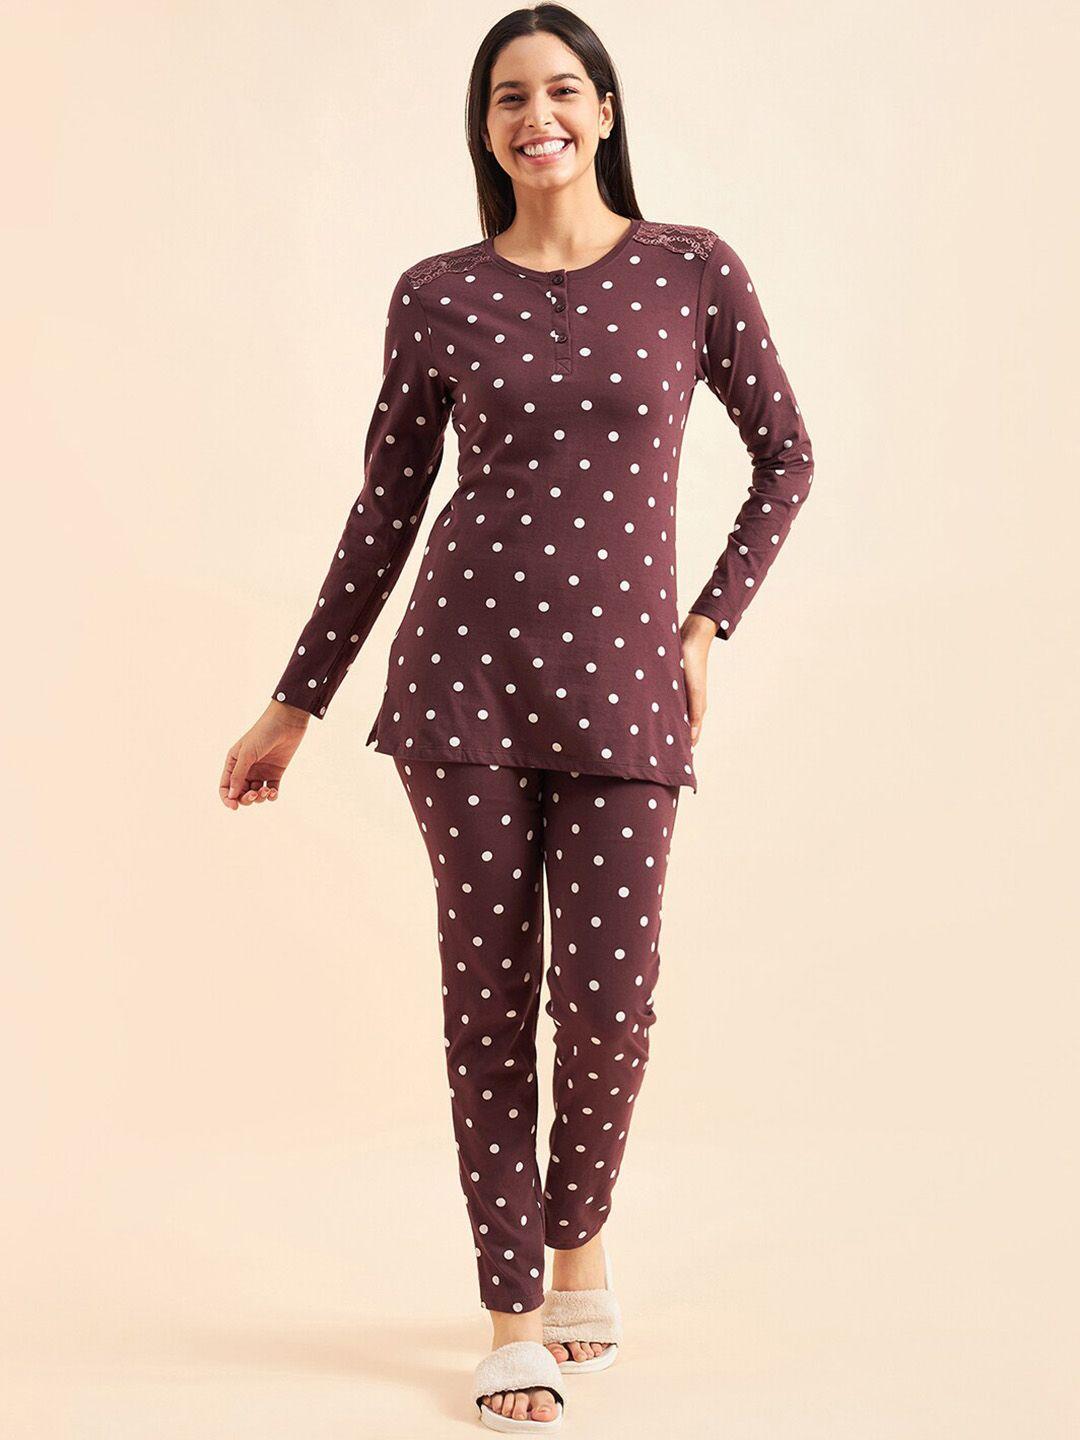 sweet-dreams-brown-&-white-polka-dots-printed-pure-cotton-night-suit